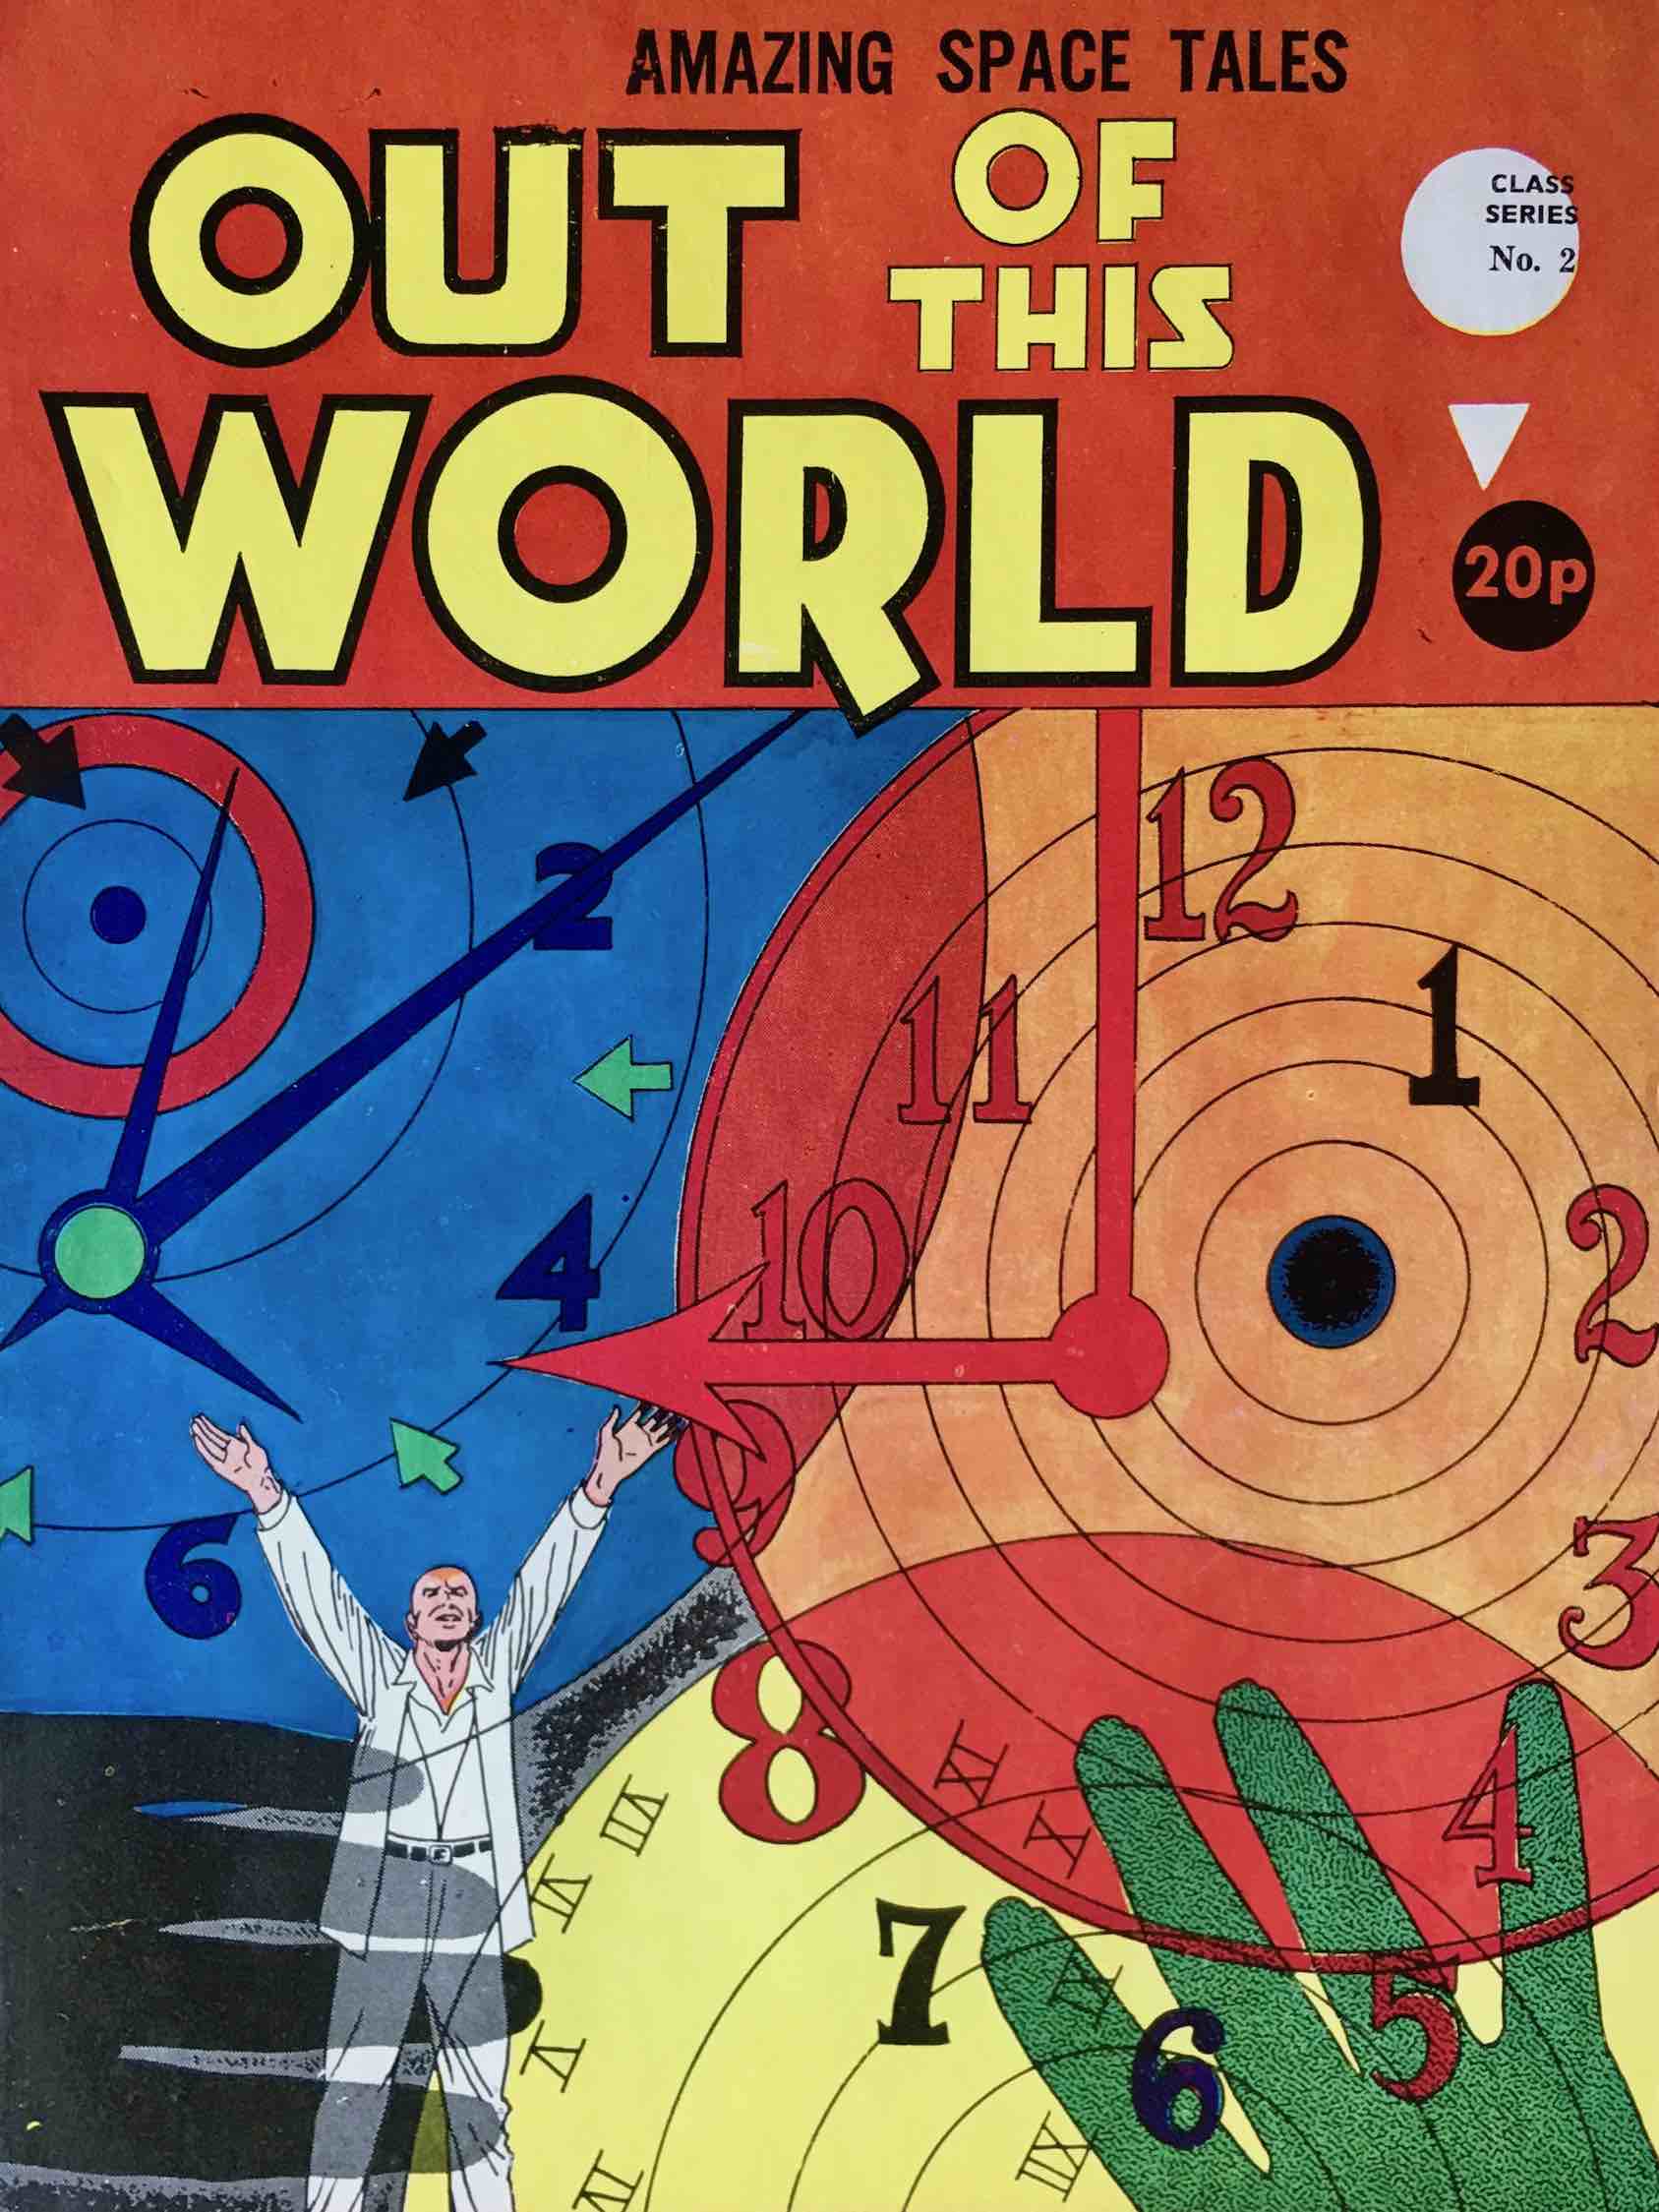 Book Cover For Out of this World v2 2